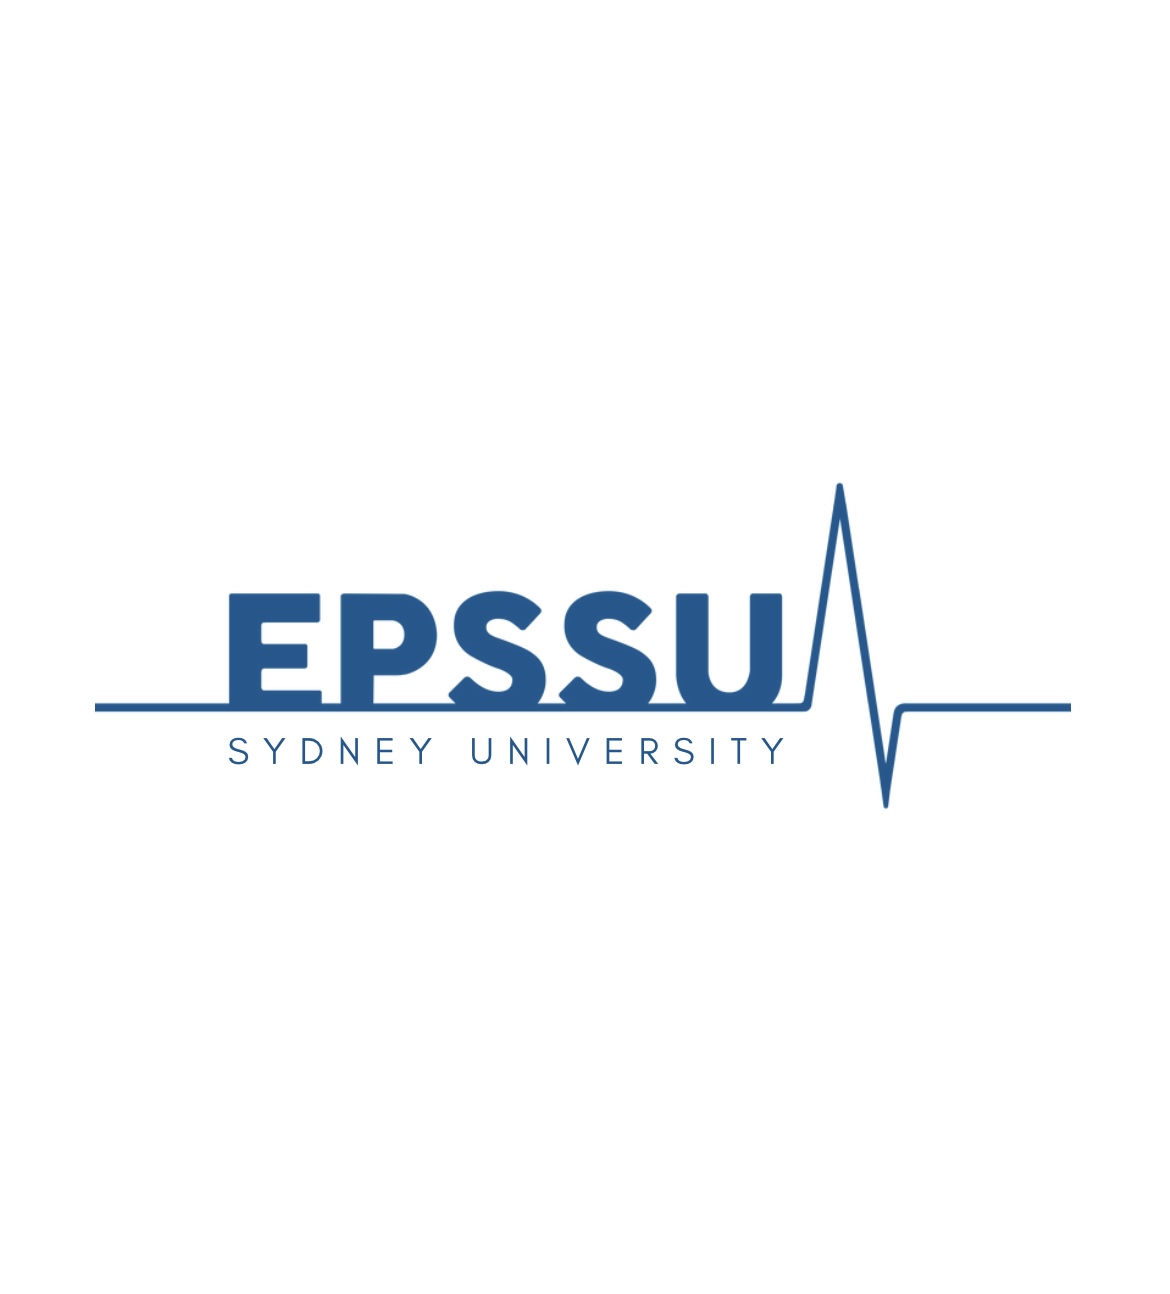 Exercise Physiology and Sport Science Union